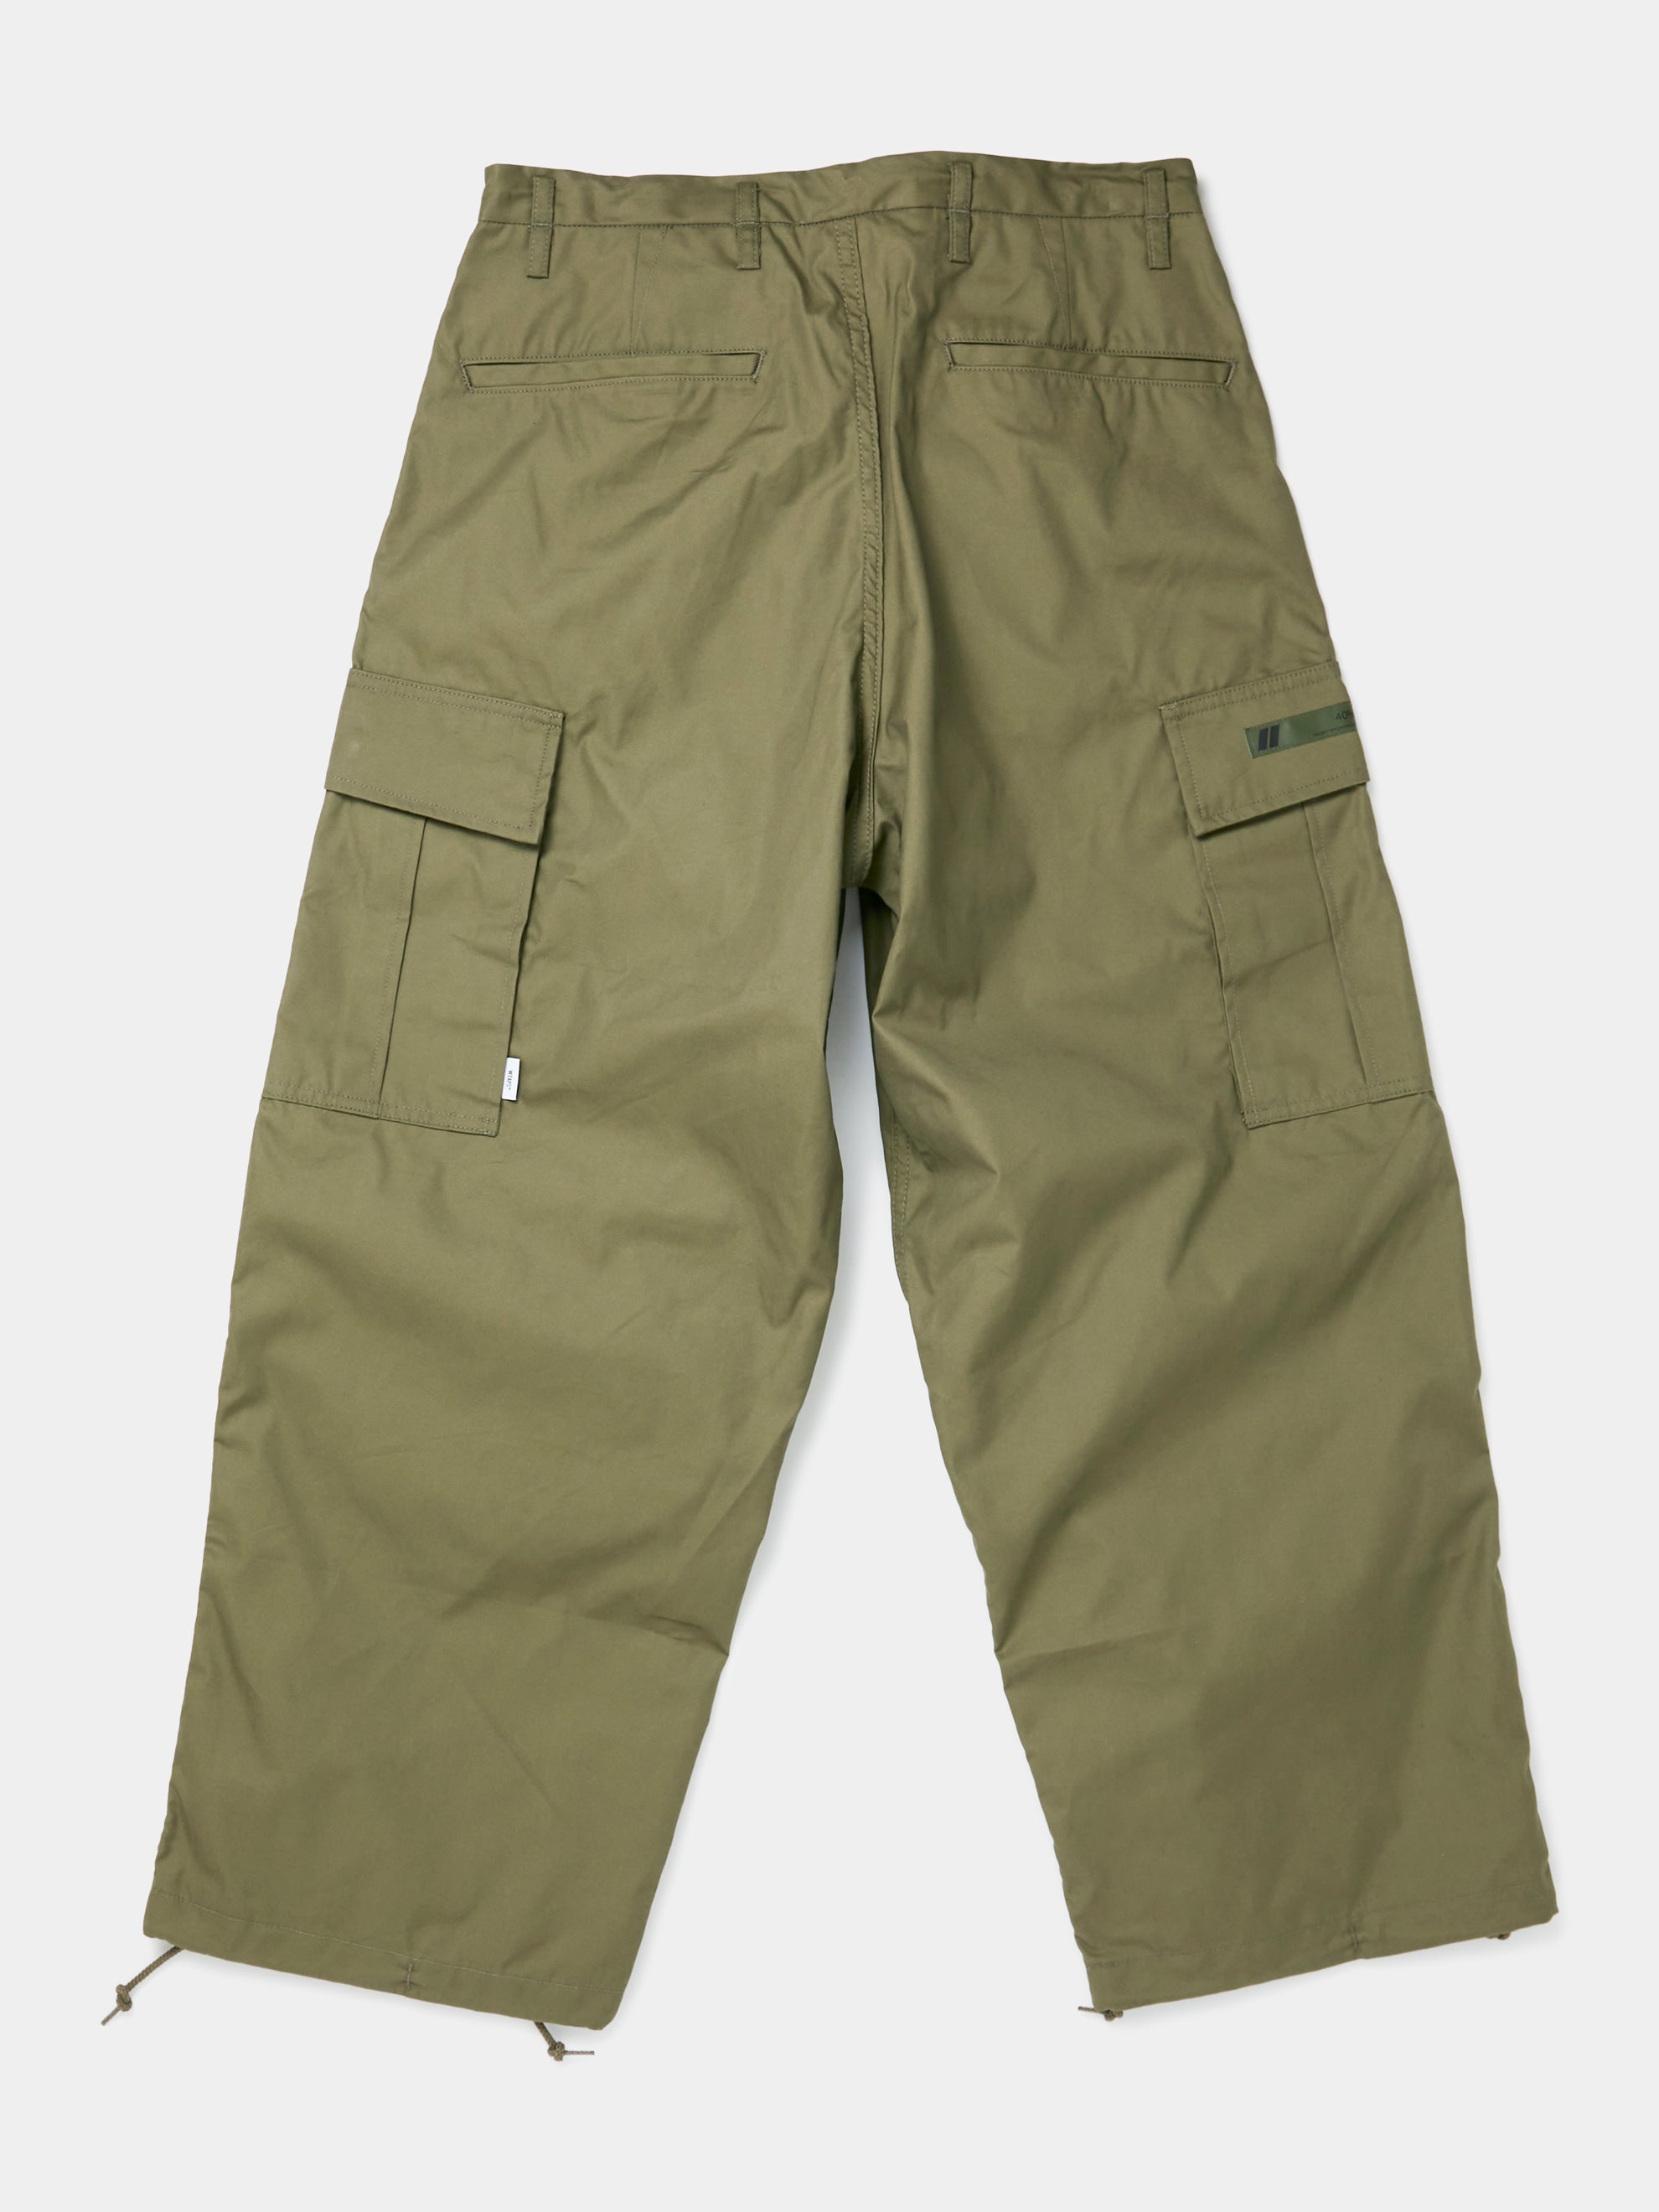 MILT0001 / TROUSERS / NYCO. (Olive Drab)